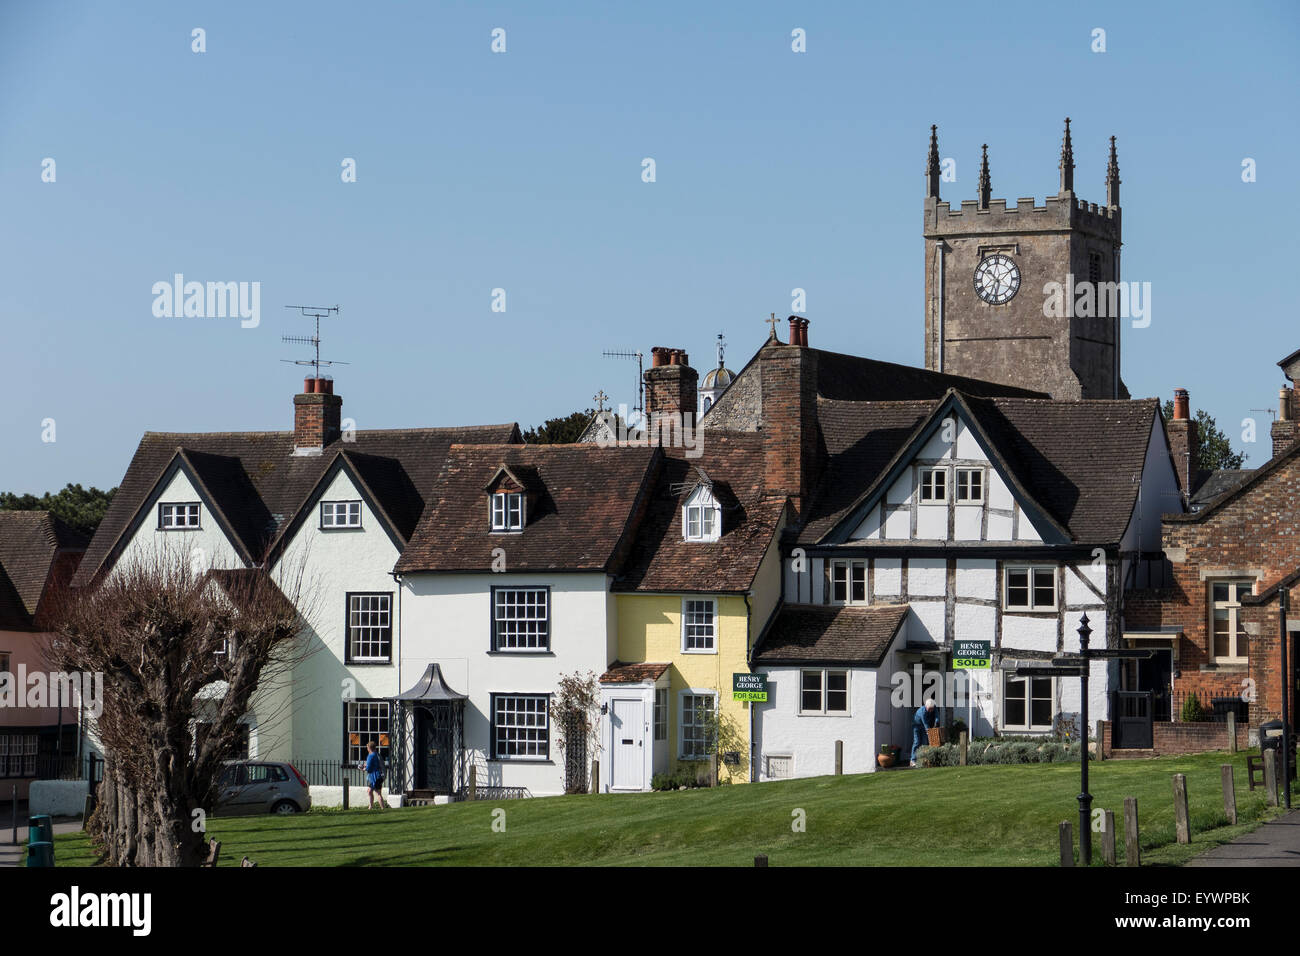 The Green and St. Mary's church, Marlborough, Wiltshire, England, United Kingdom, Europe Stock Photo